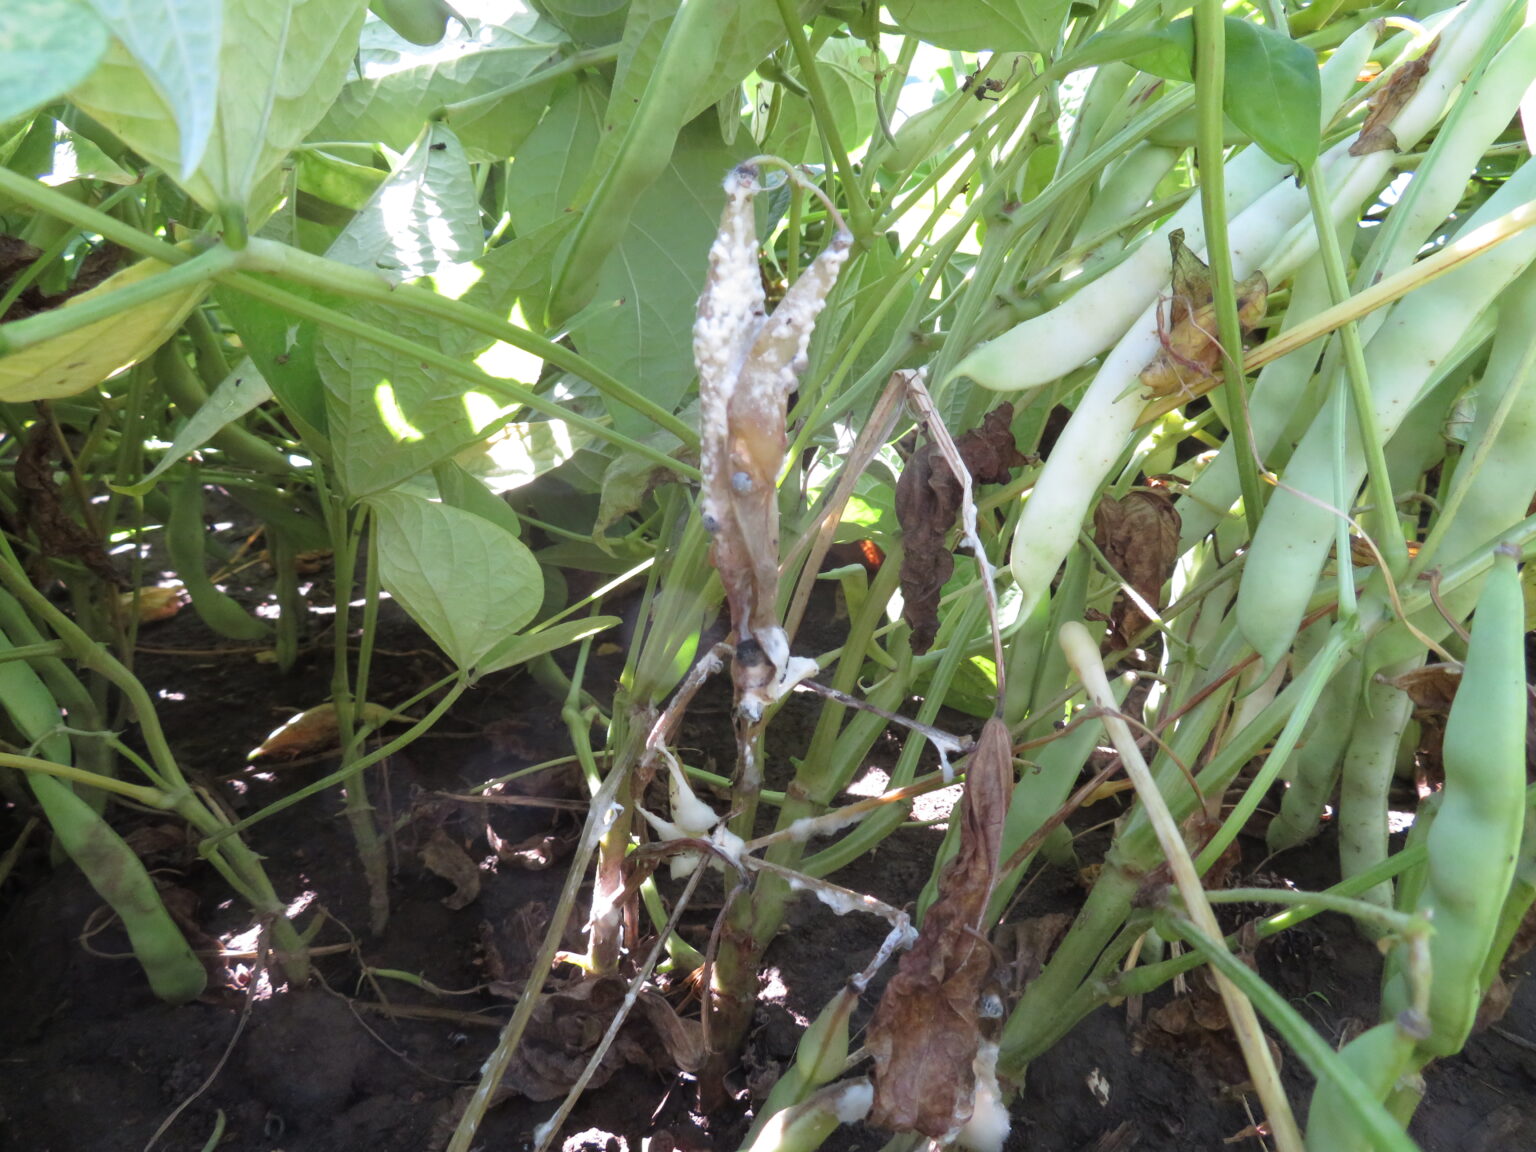 White Mold Fungicides for Dry Beans, 20092011 Dry Bean